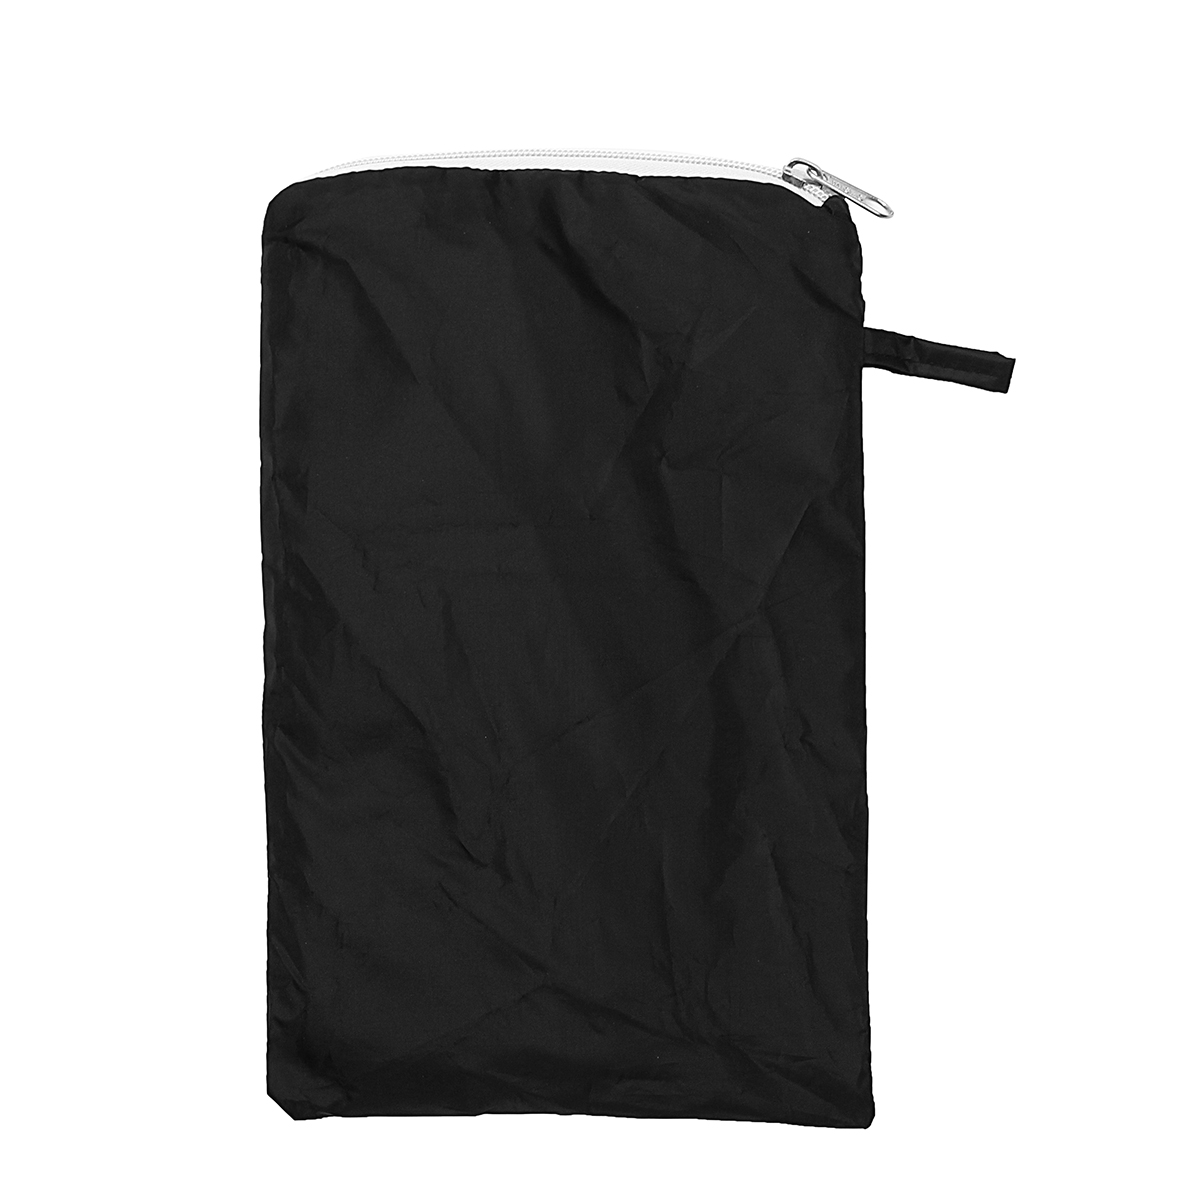 Outdoor-Pizza-Oven-Waterproof-Rain-Cover-BBQ-Charcoal-Fired-Bread-Oven-Smoker-Protector-1337984-5